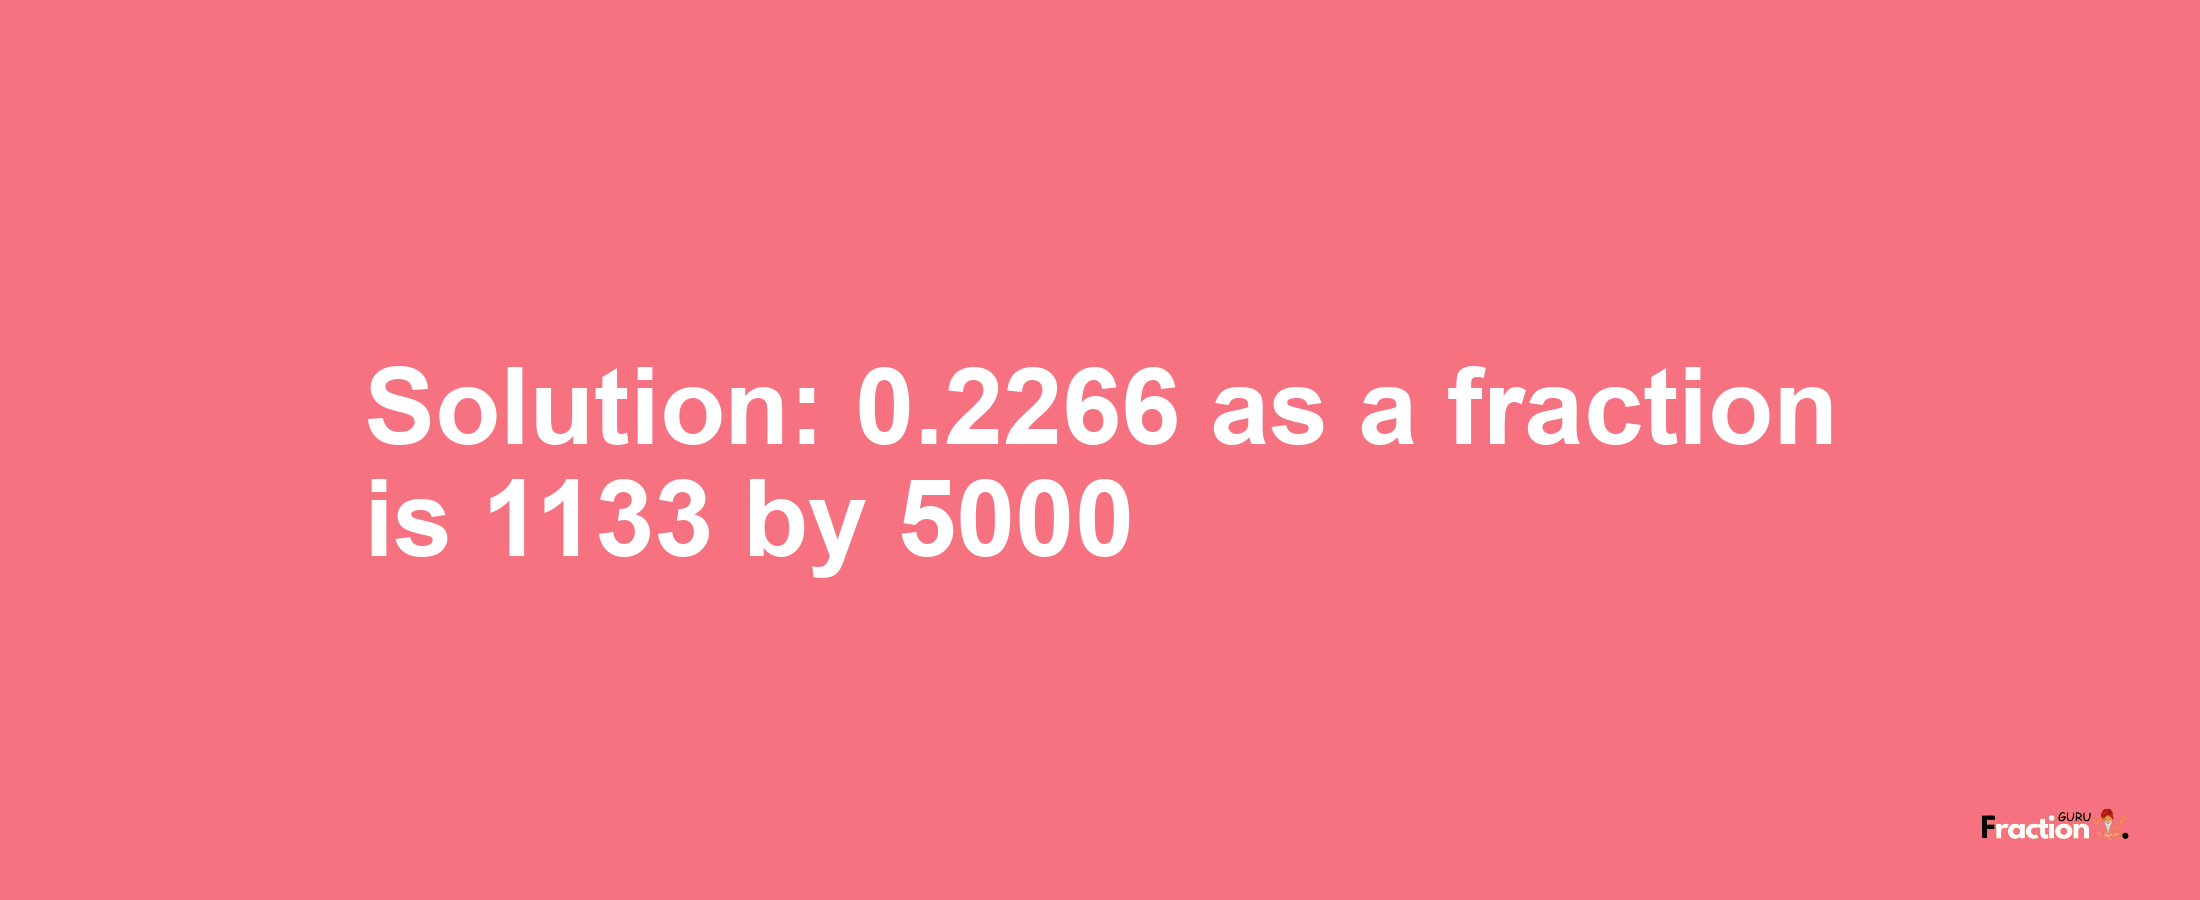 Solution:0.2266 as a fraction is 1133/5000